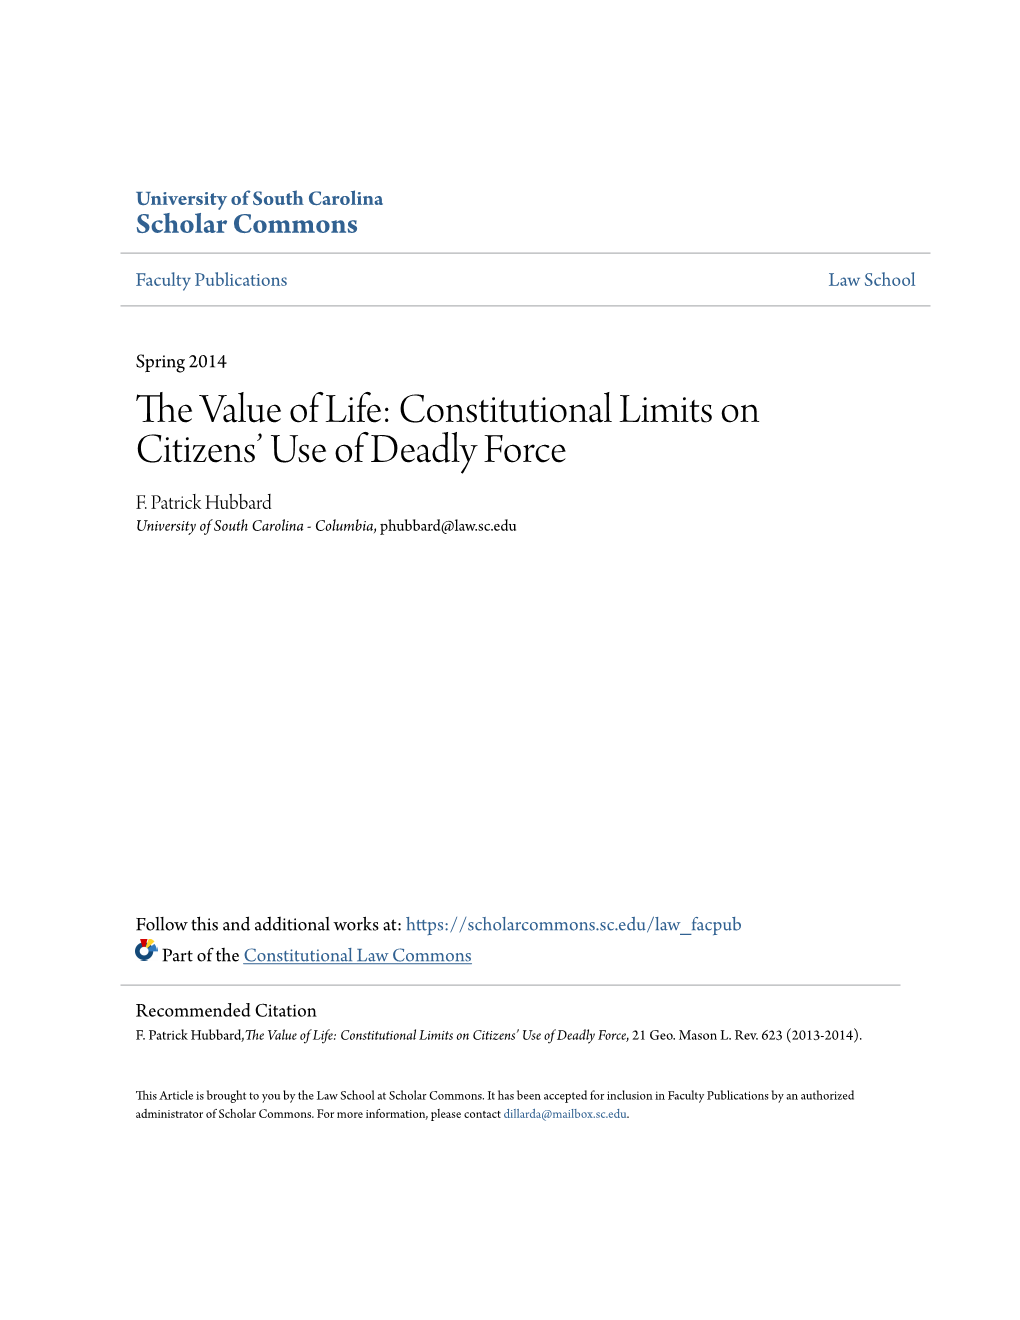 The Value of Life: Constitutional Limits on Citizens' Use of Deadly Force